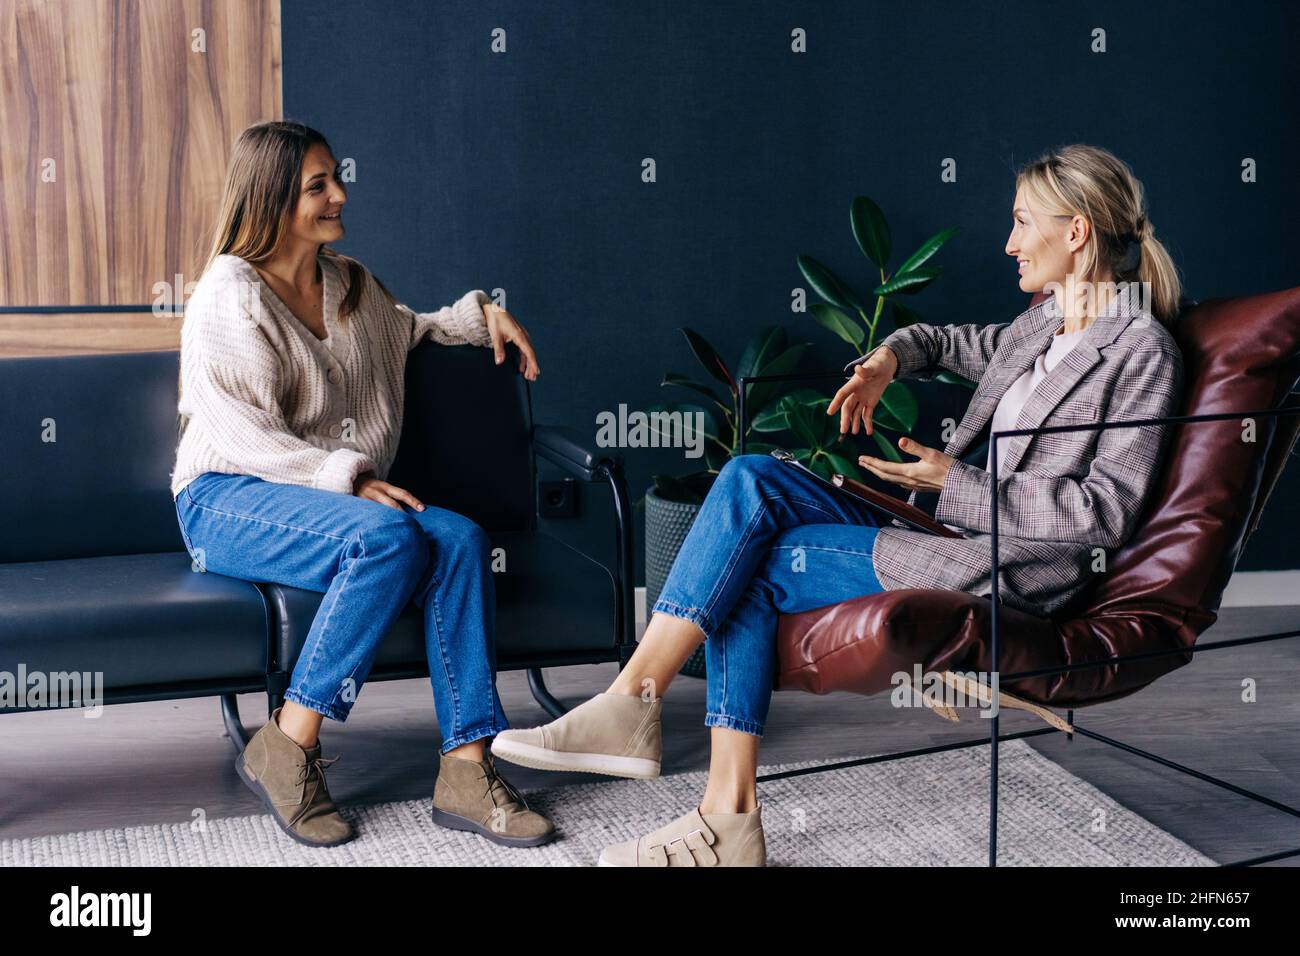 Two modern stylish women are sitting in the office discussing ideas and implementation of plans. Stock Photo